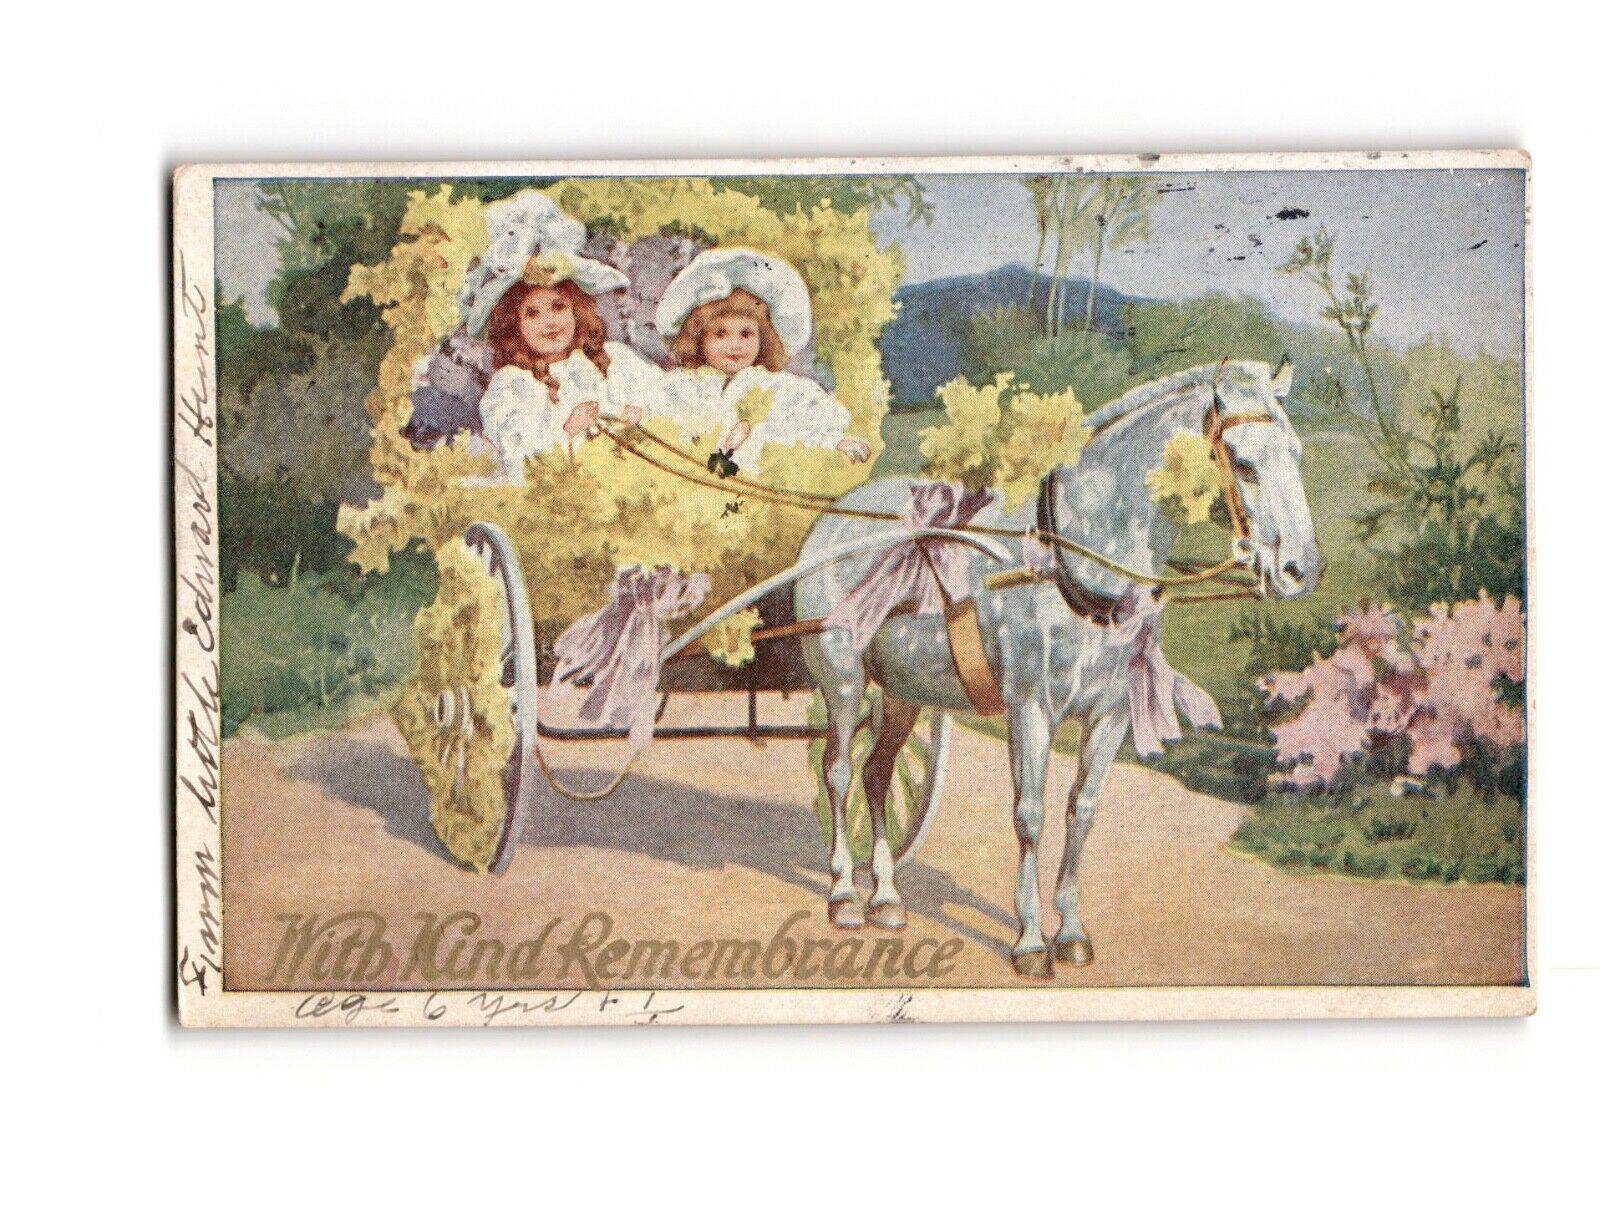 1909 Vintage Postcard 'With Kind Remembrance' - Children in Horse-Drawn Carriage